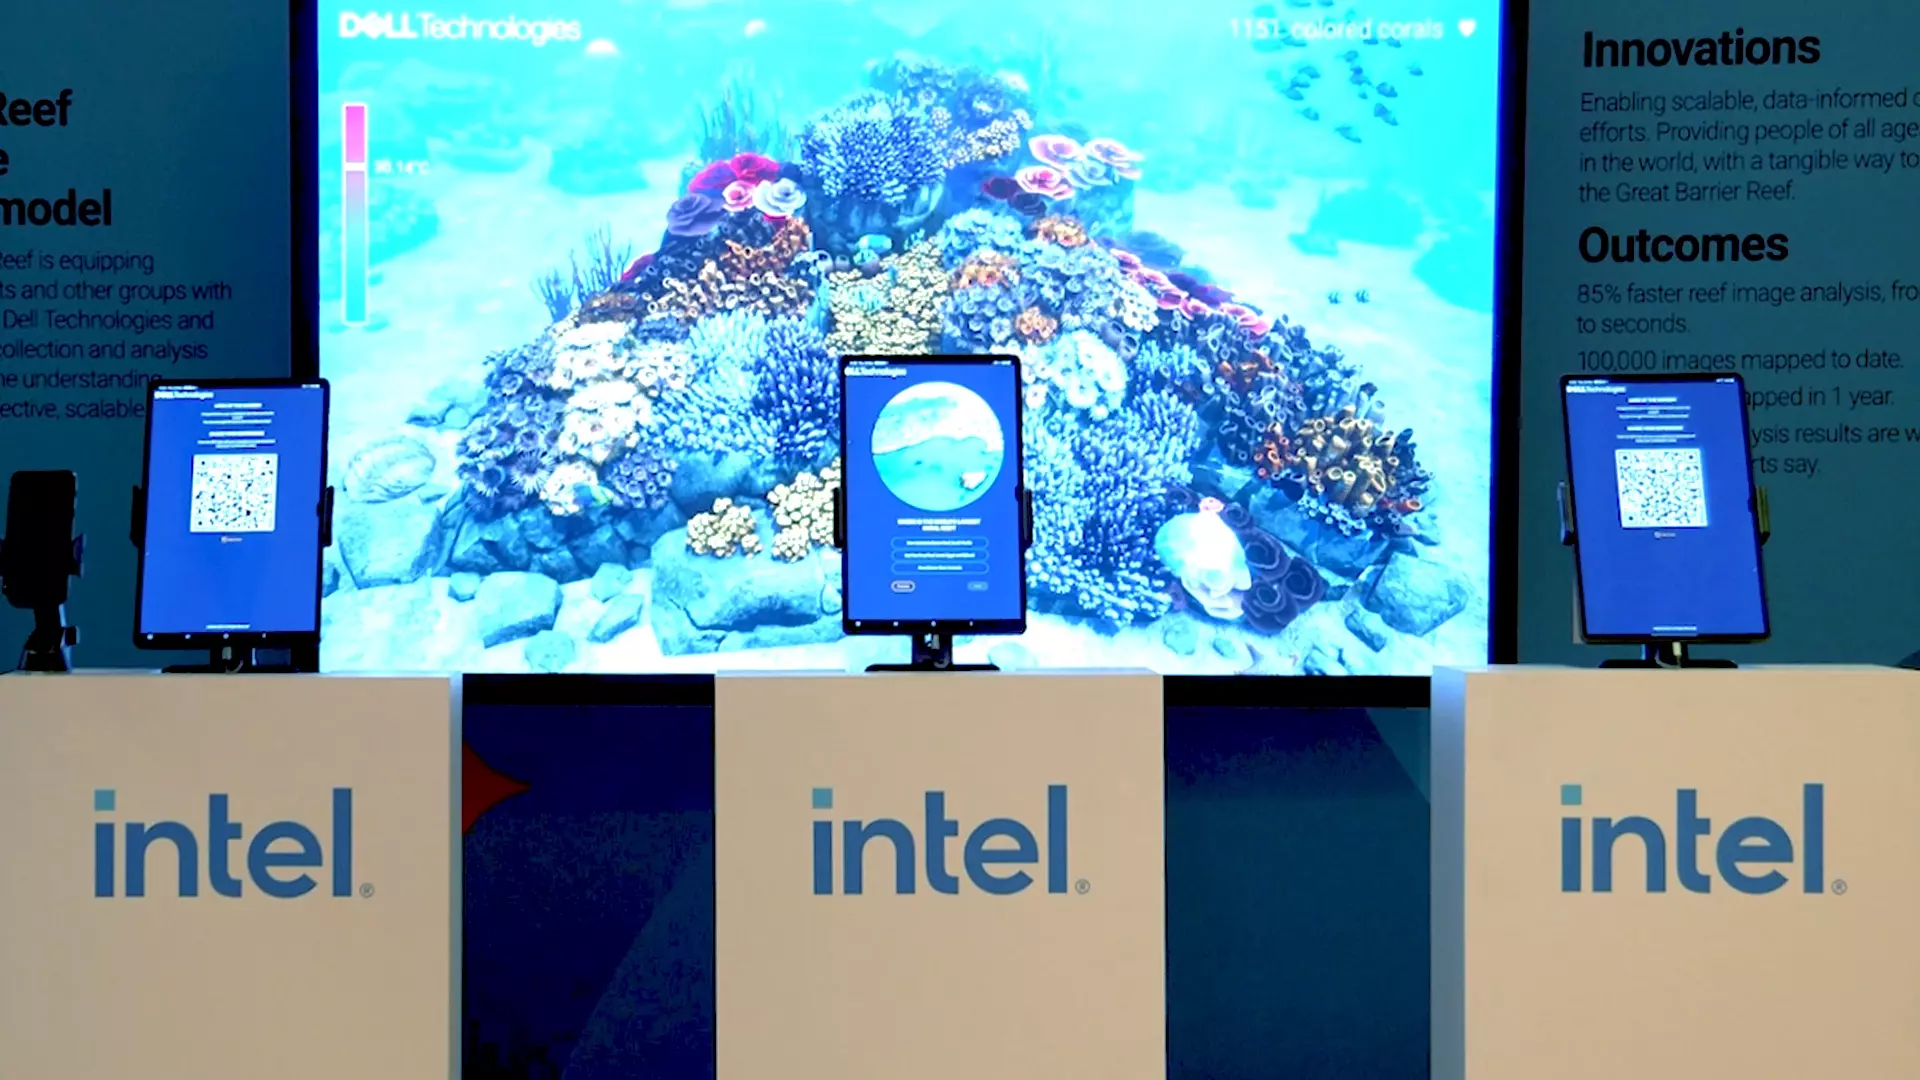 Dell booth with CSR Great Barrier Reef digital installation Experience